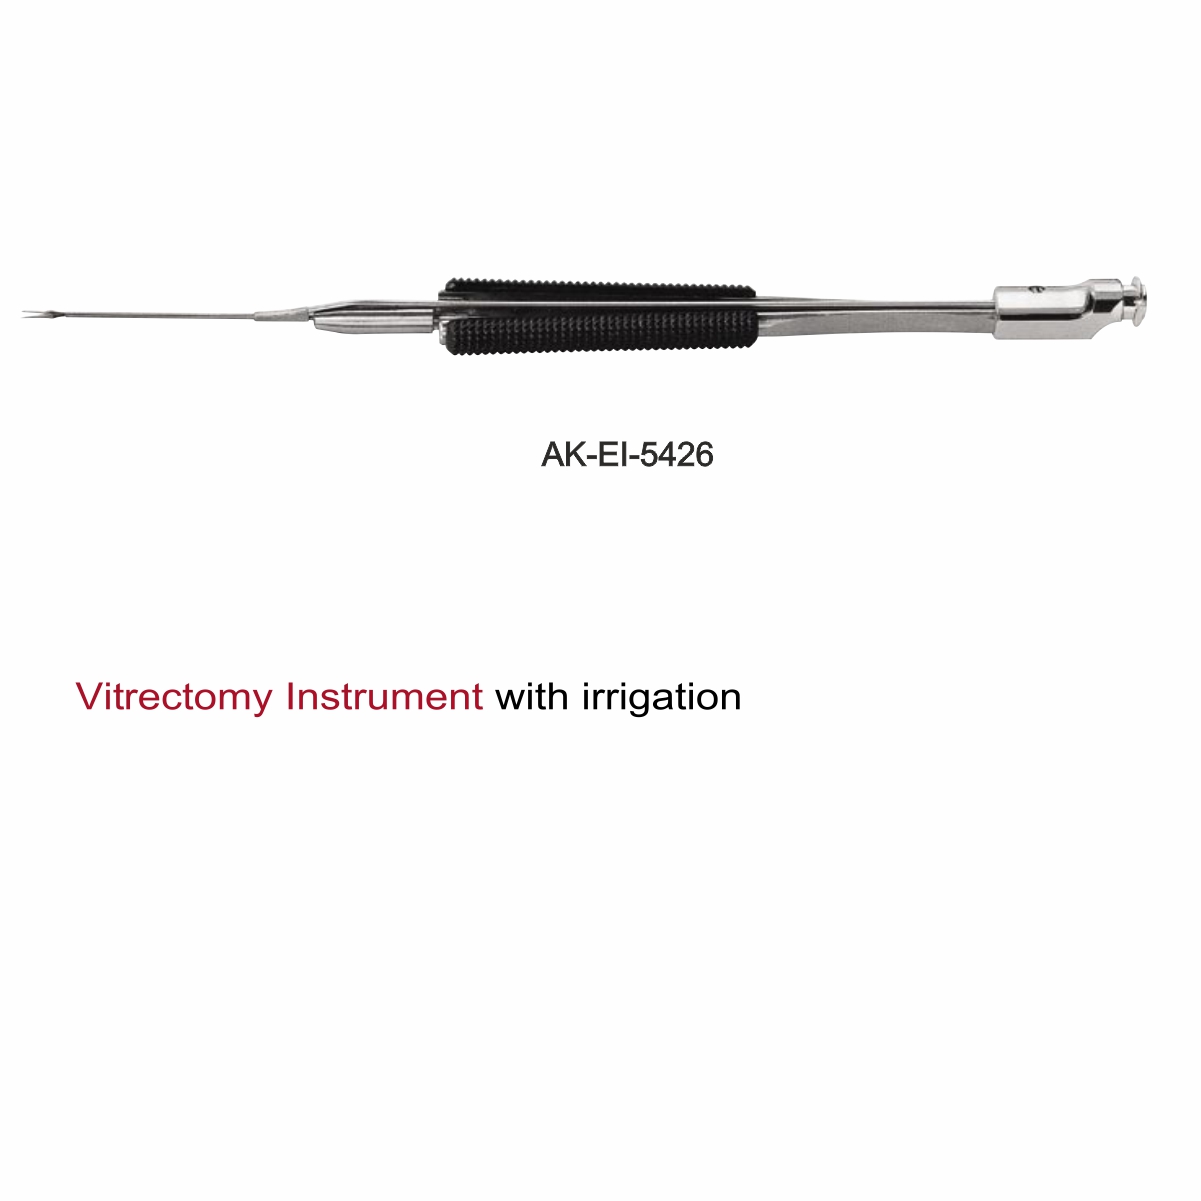 Vitrectomy Instrument with irrigation